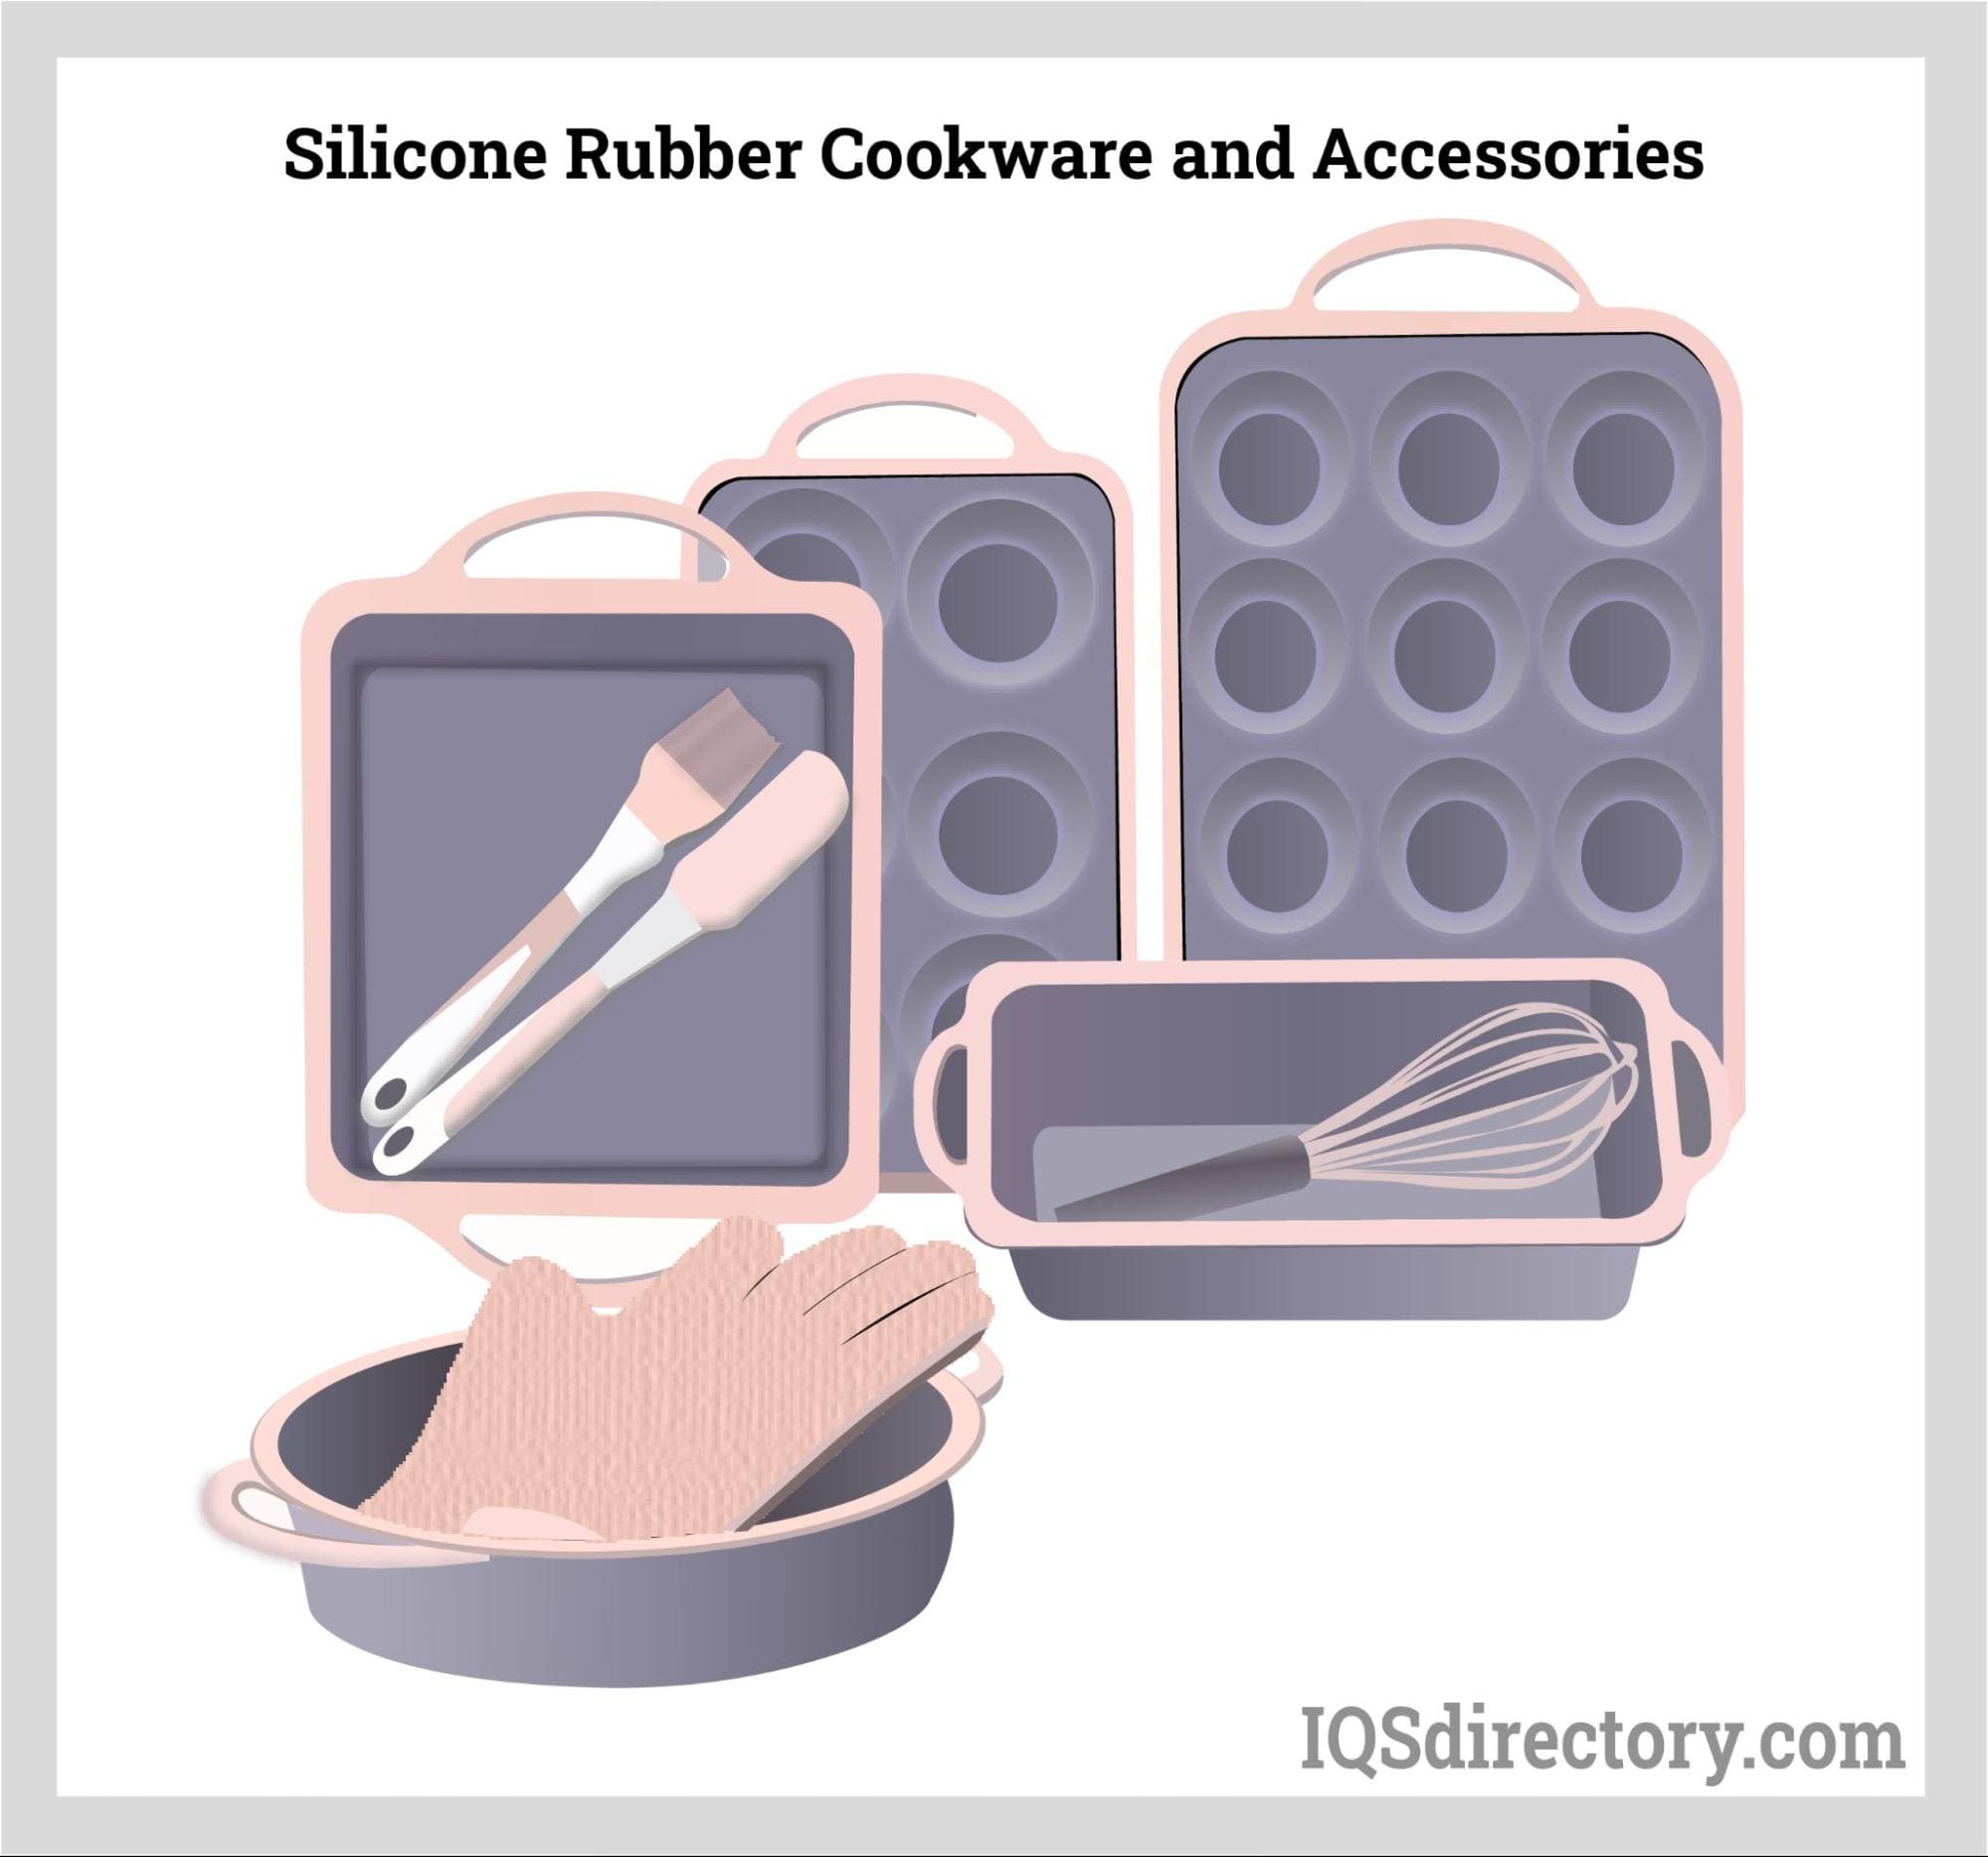 Silicone Rubber Cookware and Accessories